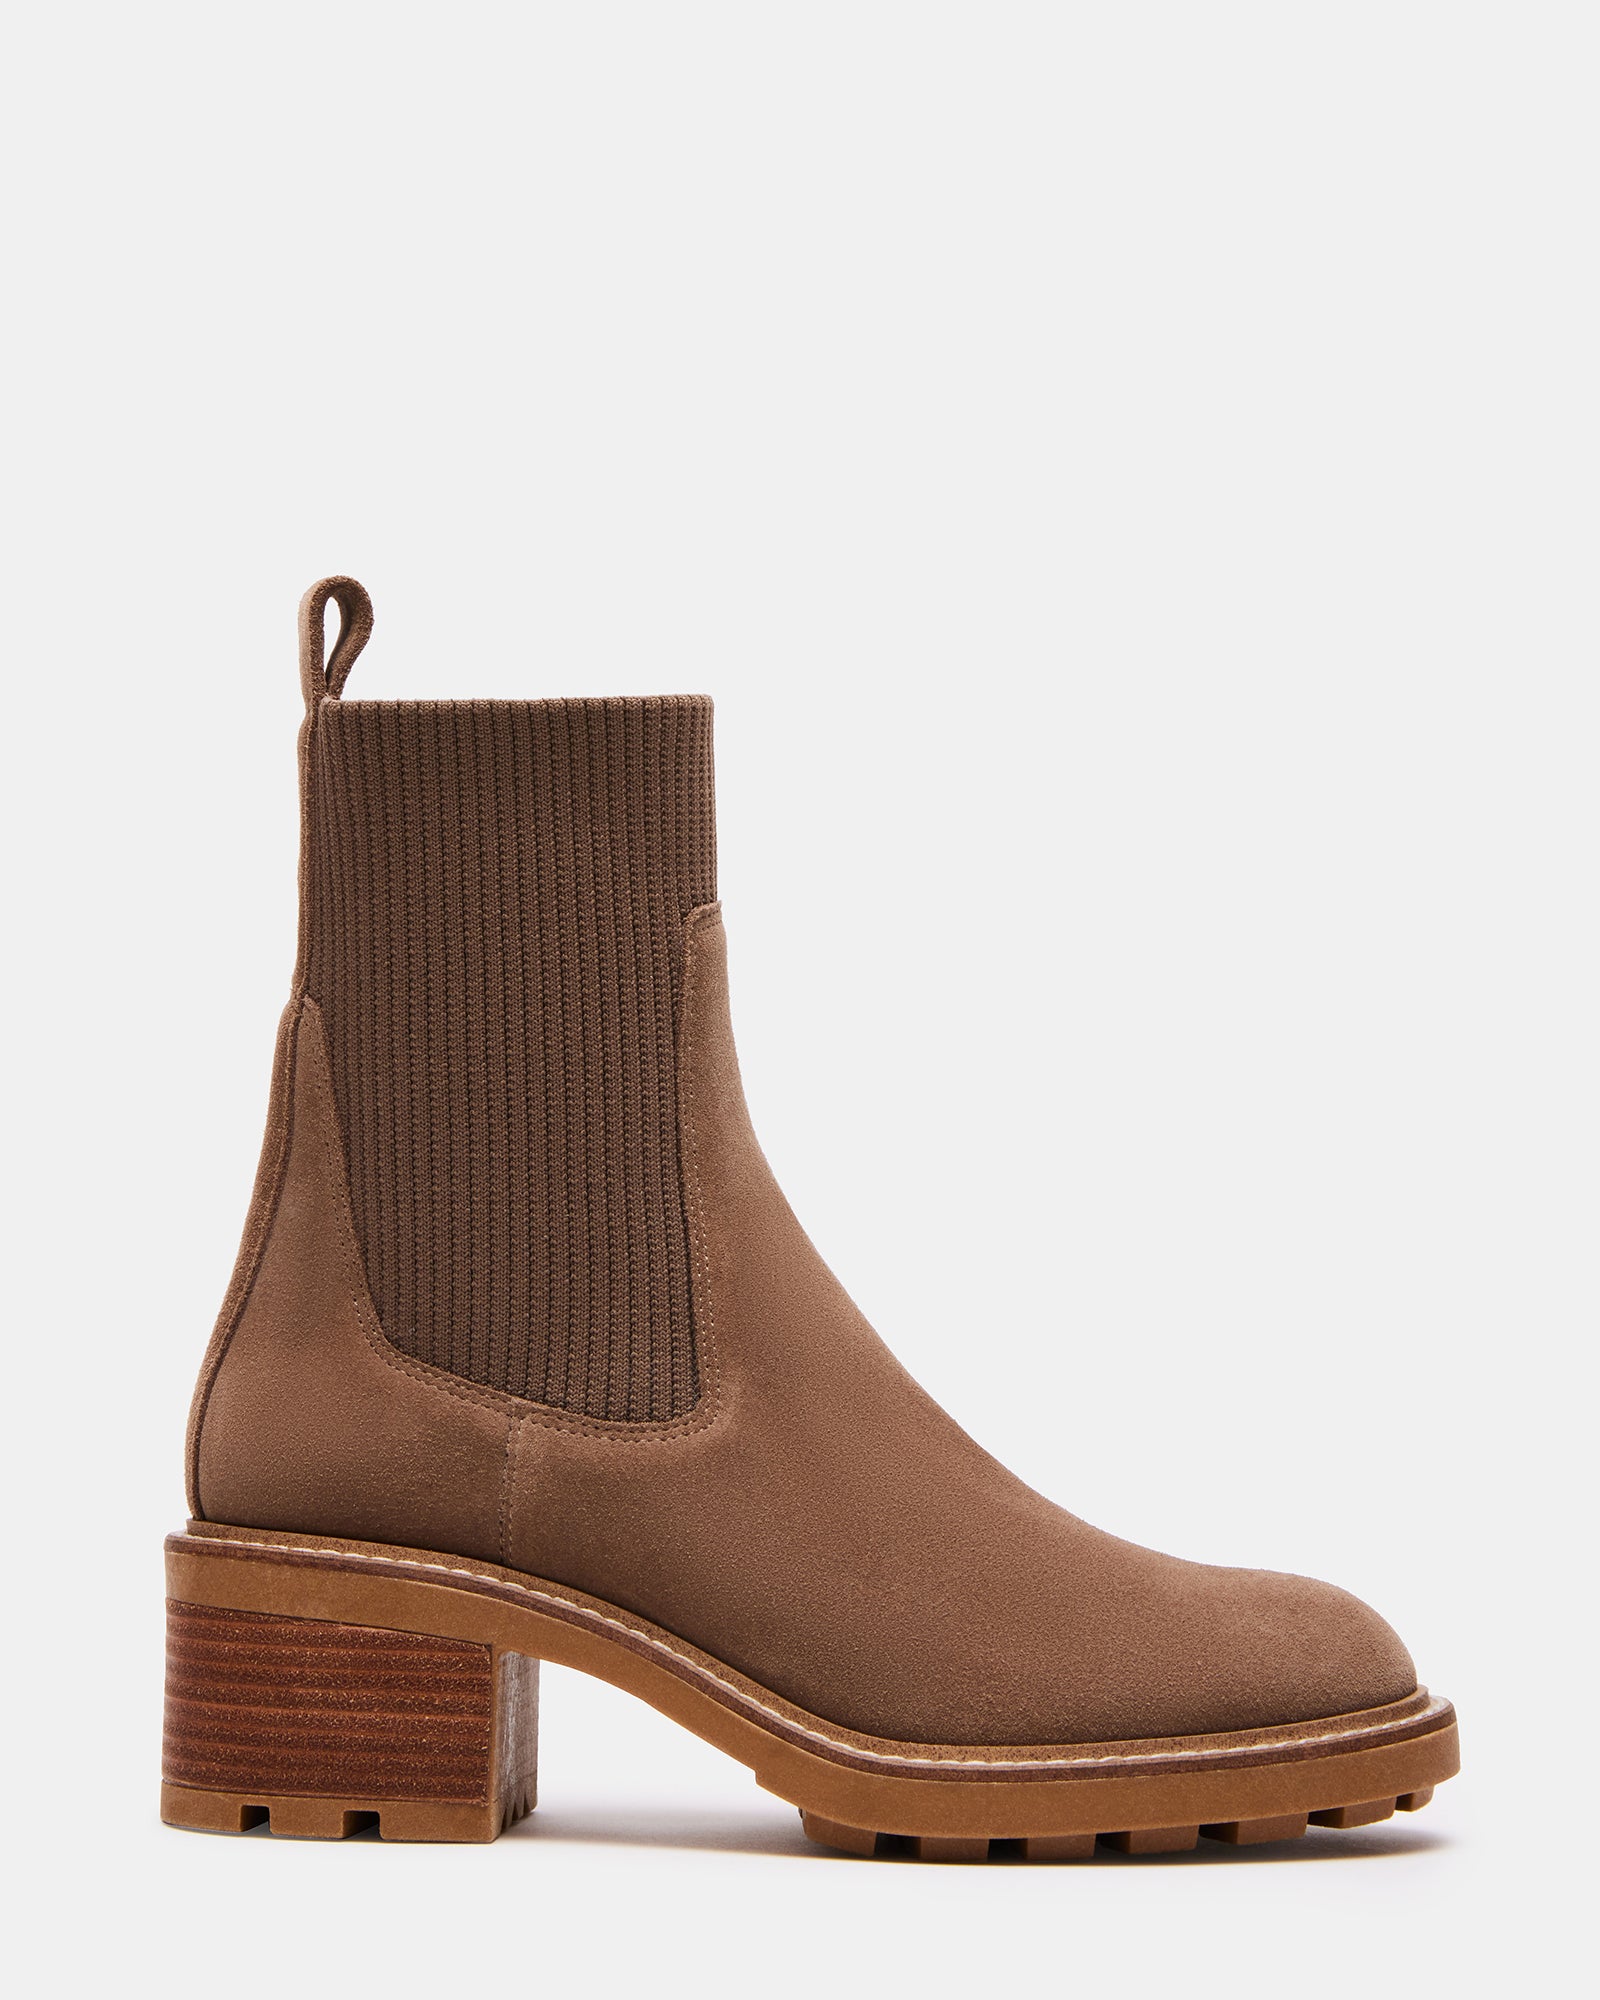 KILEY Taupe Suede Chelsea Ankle Bootie - Steve Madden